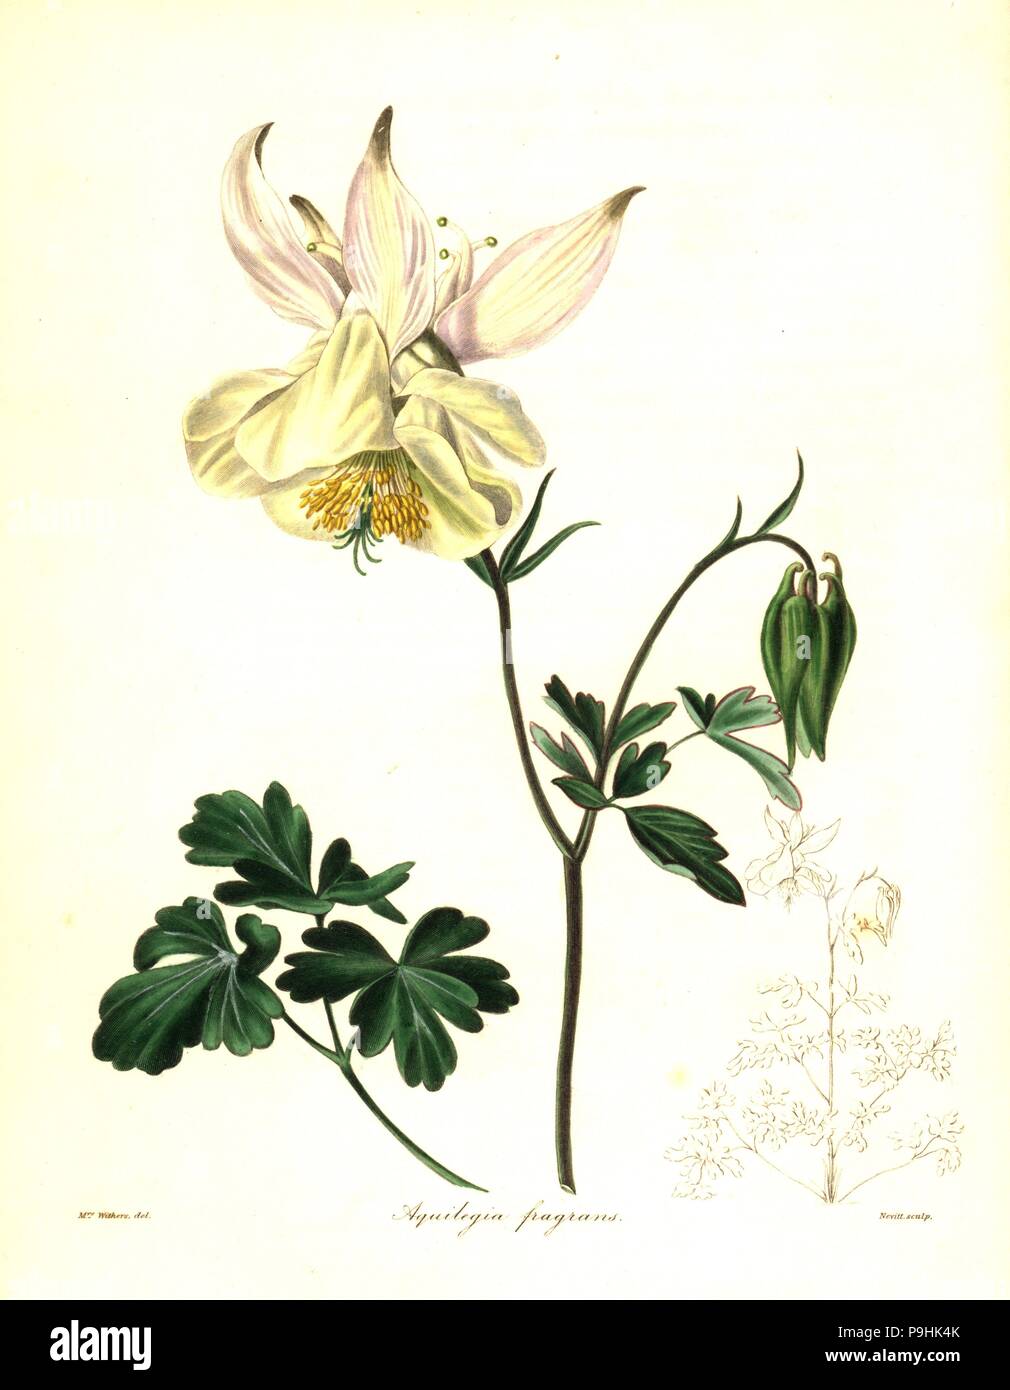 Fragrant columbine, Aquilegia fragrans. Handcoloured copperplate engraving by S. Nevitt after a botanical illustration by Mrs Augusta Withers from Benjamin Maund and the Rev. John Stevens Henslow's The Botanist, London, 1836. Stock Photo